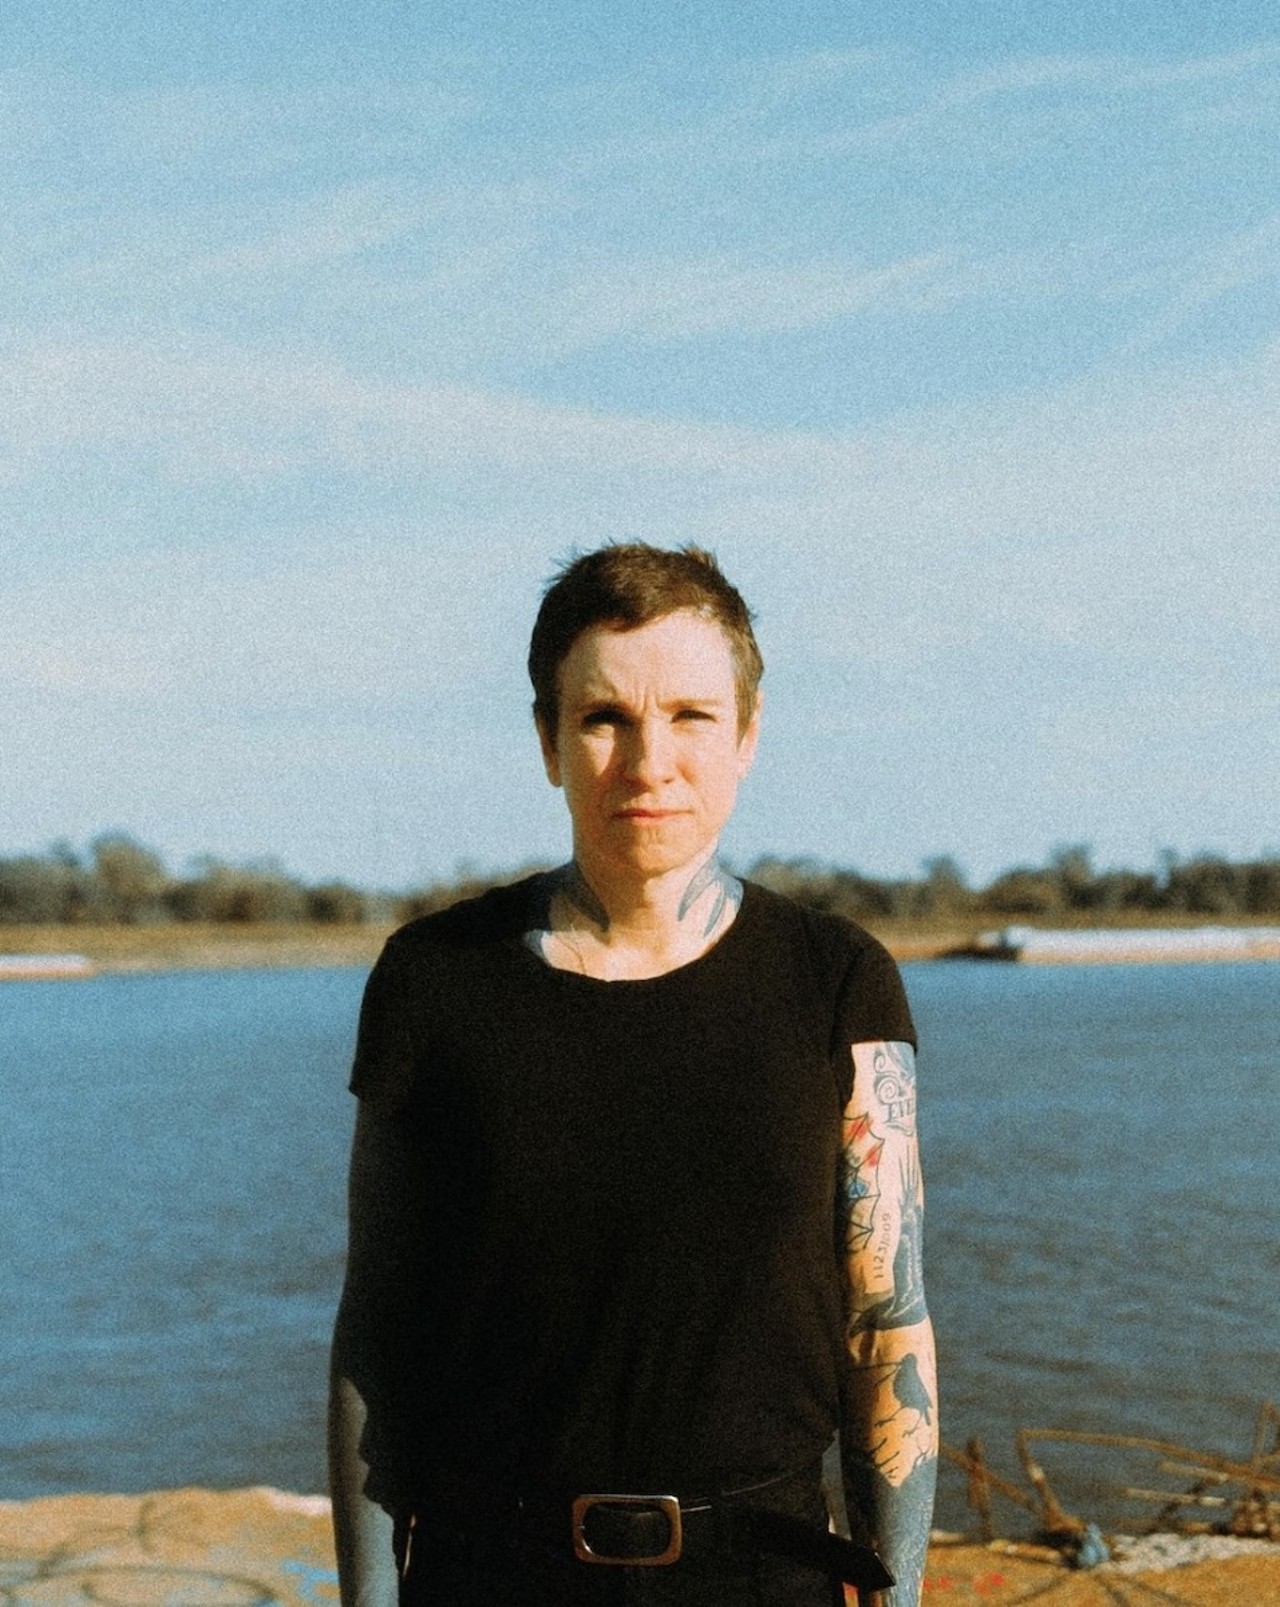 Laura Jane Grace at Madison Theater
When: May 26 at 8 p.m.
Where: Madison Theater, Covington
What: See Laura Jane Grace with Worriers and Sam Russo at an all-ages show.
Who: Madison Theater
Why: Also perfect for those fans waiting for Against Me! to end their hiatus.